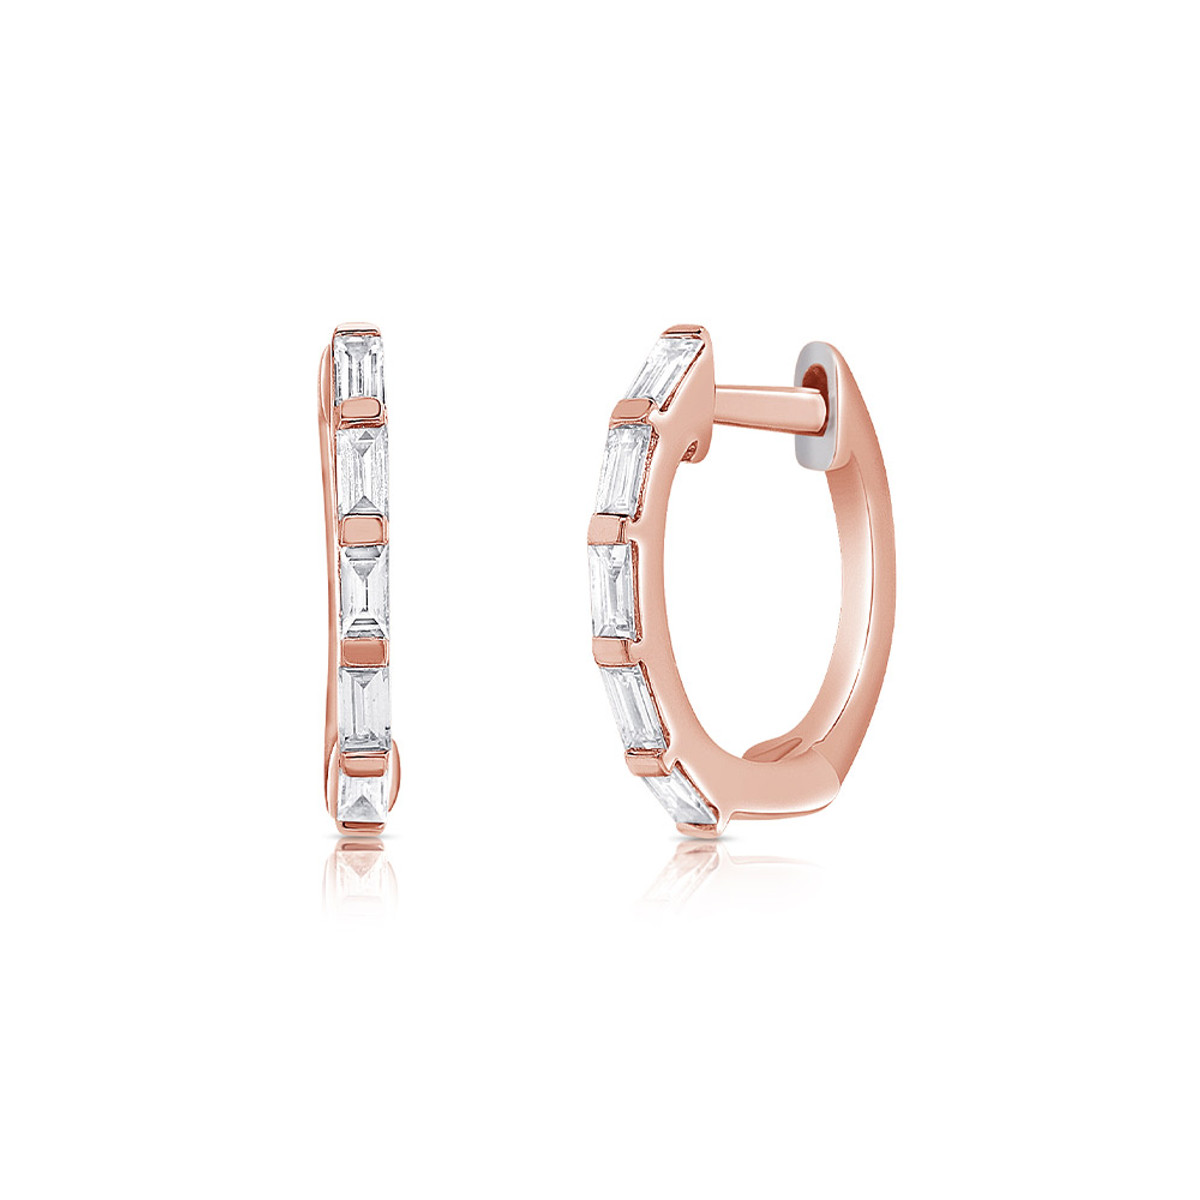 Hyde Park Collection 14K Rose Gold Diamond Huggie Hoop Earrings-41769 Product Image